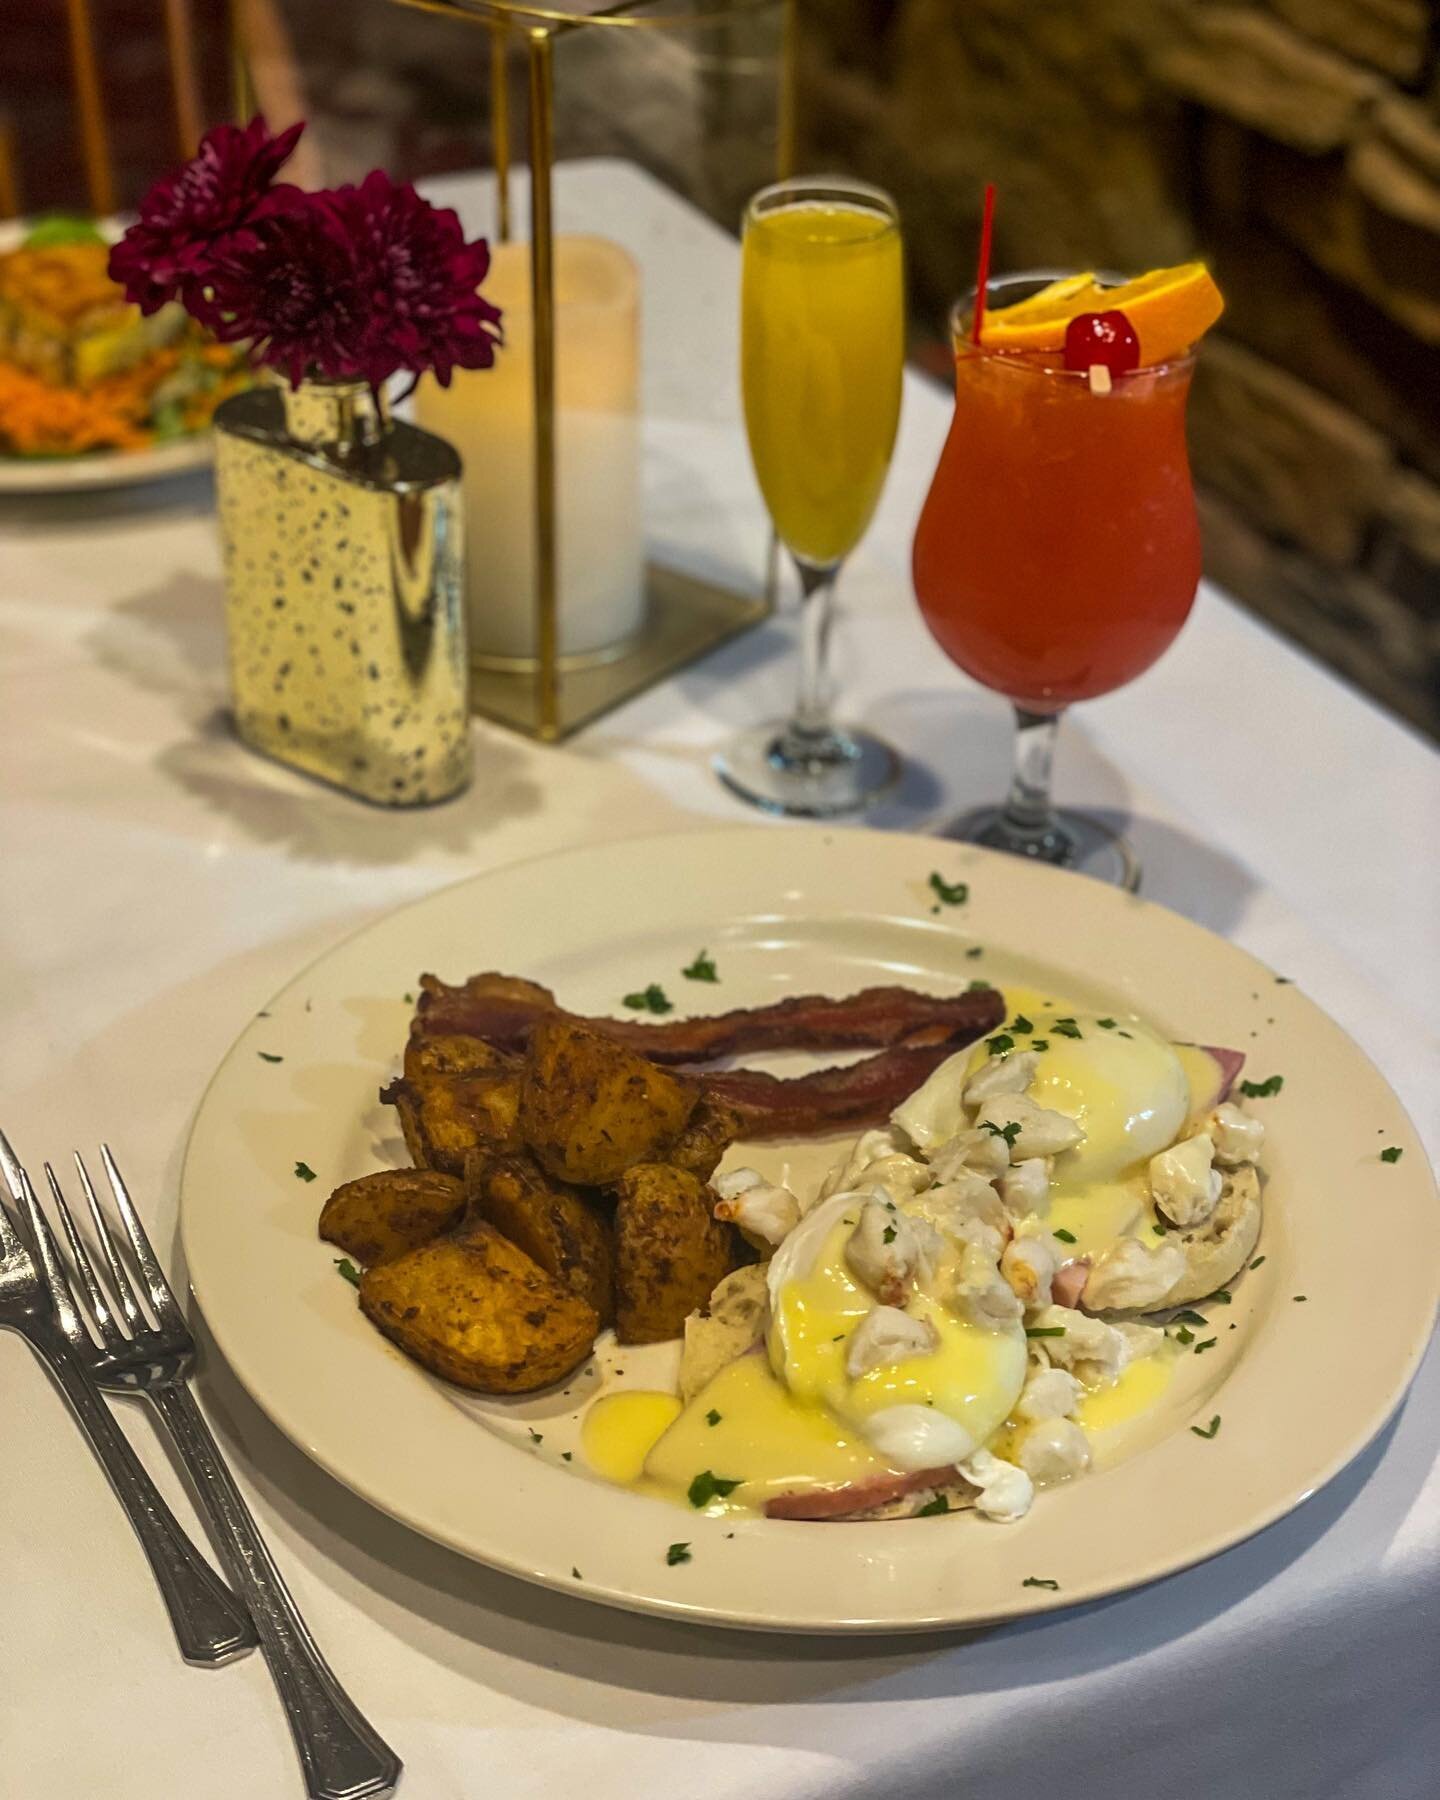 *New Sunday Hours* Brunch 10am to 2 pm! Try our house favorites, the Crab Benedict and Quiche Du Jour. $5 Bloody Mary&rsquo;s and $4 Mimosas. 🥂 Check out our menu here  https://www.risingsuninn.net/menus-1 

#brunch #sundaybrunch #sundayfunday #brun